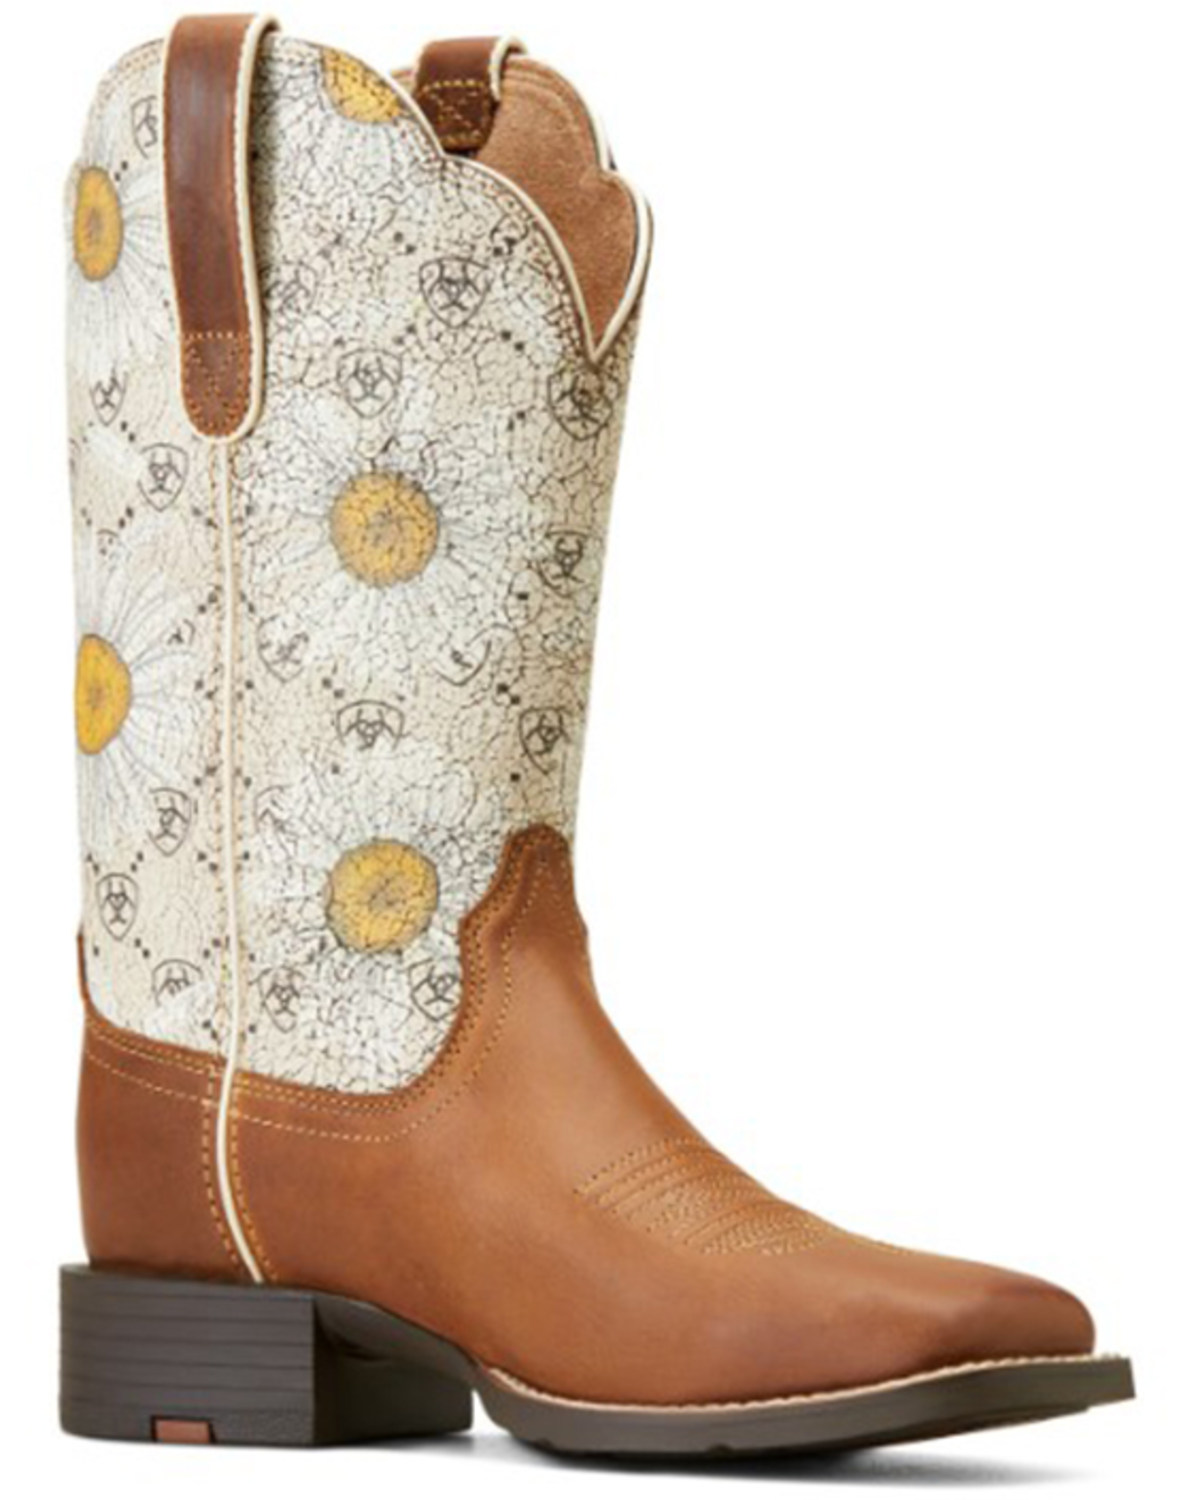 Ariat Women's Round Up Western Boots - Broad Square Toe